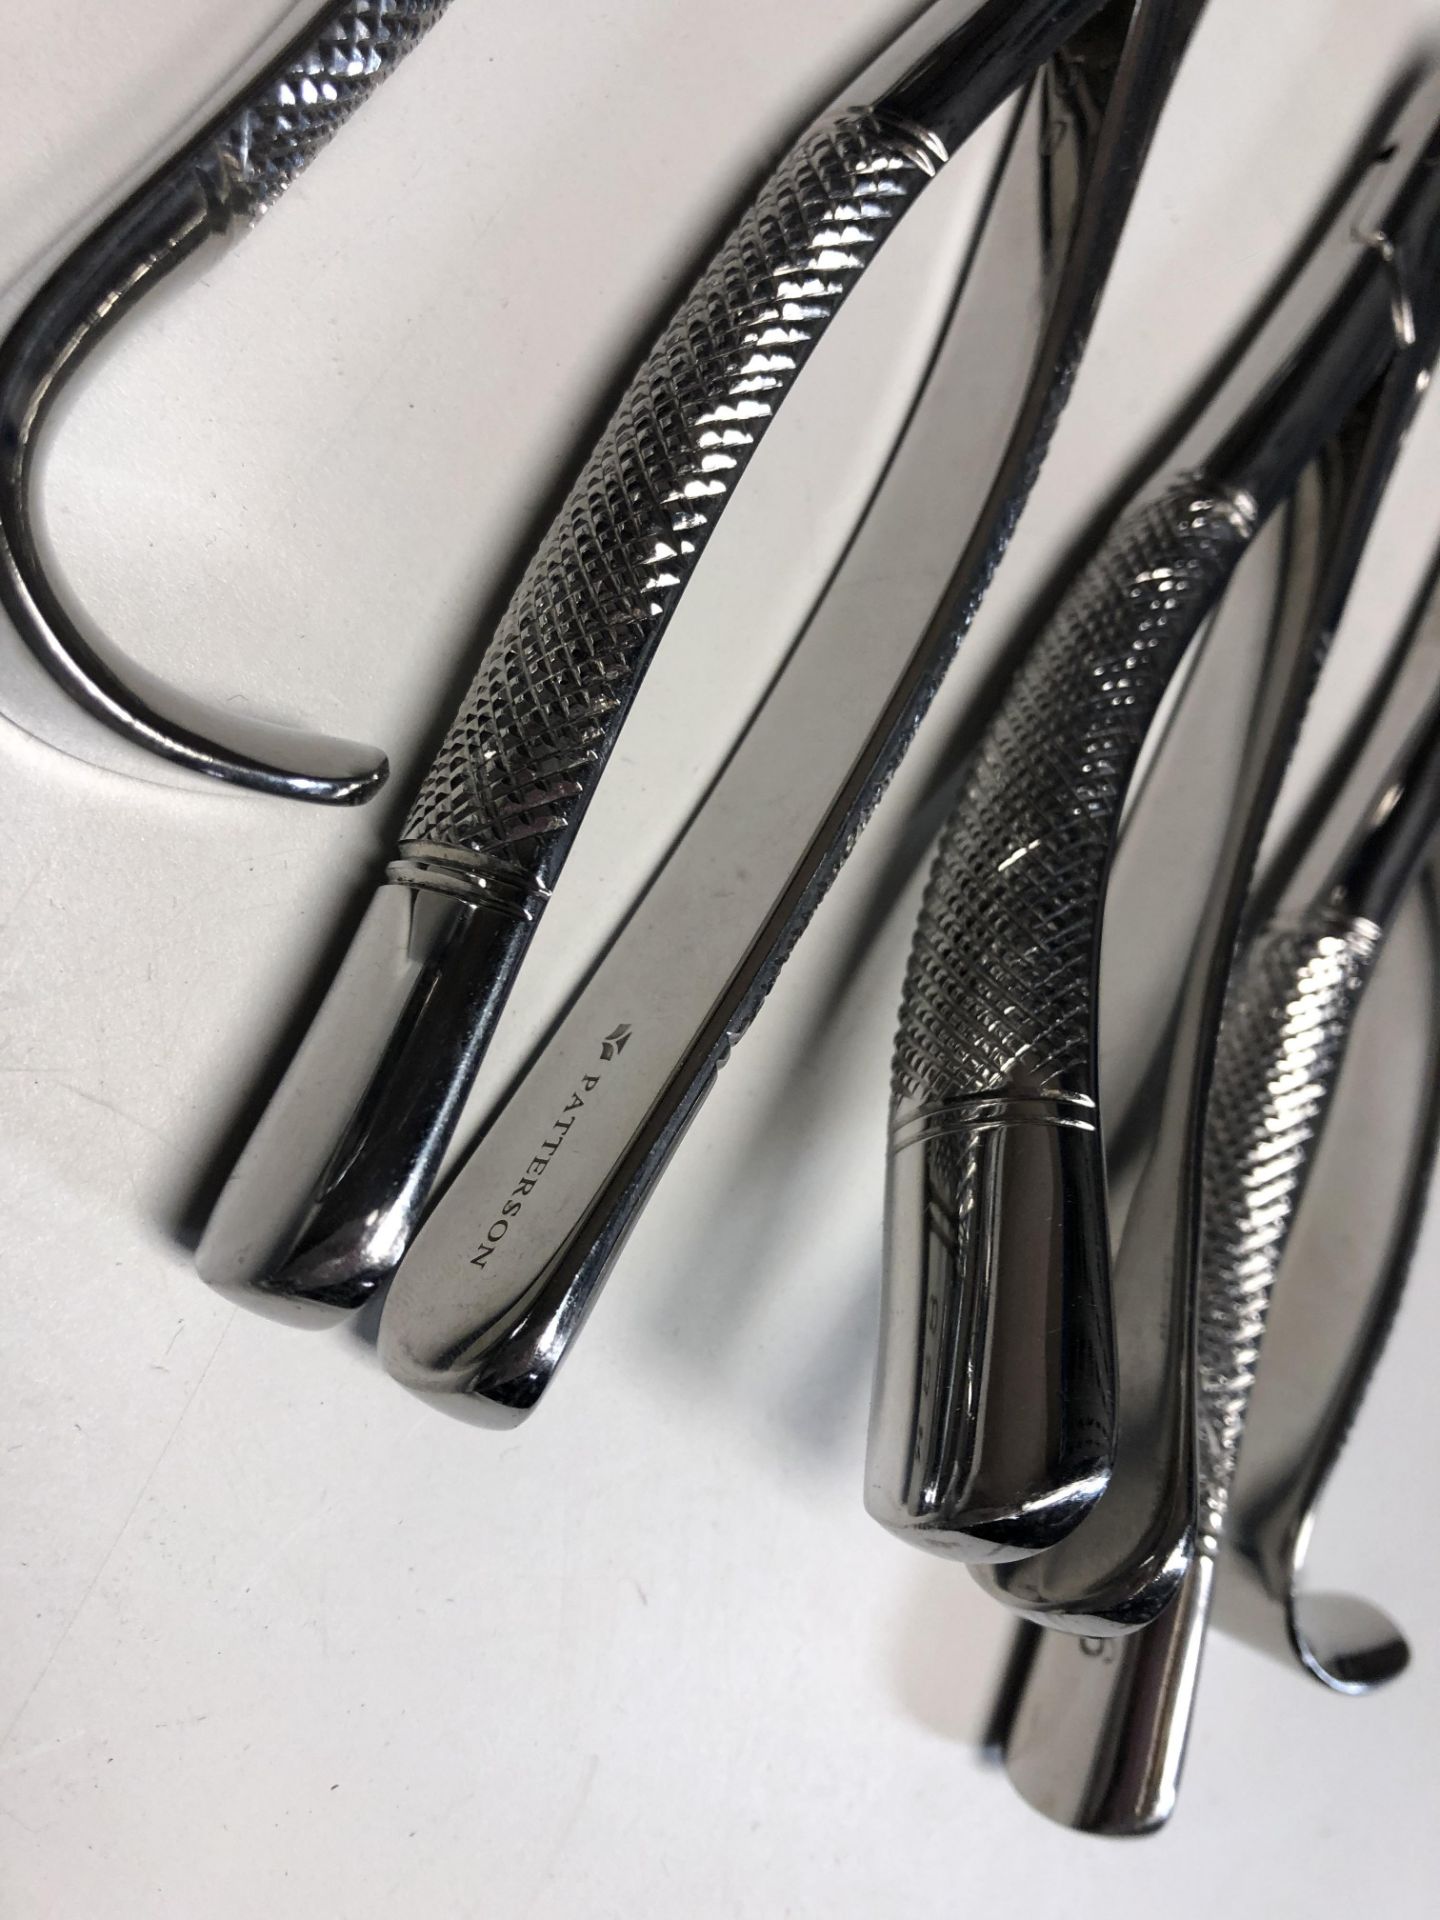 LOT OF PATTERSON DENTAL EXTRACTION FORCEPS/PLIERS TOOLS - Image 2 of 2